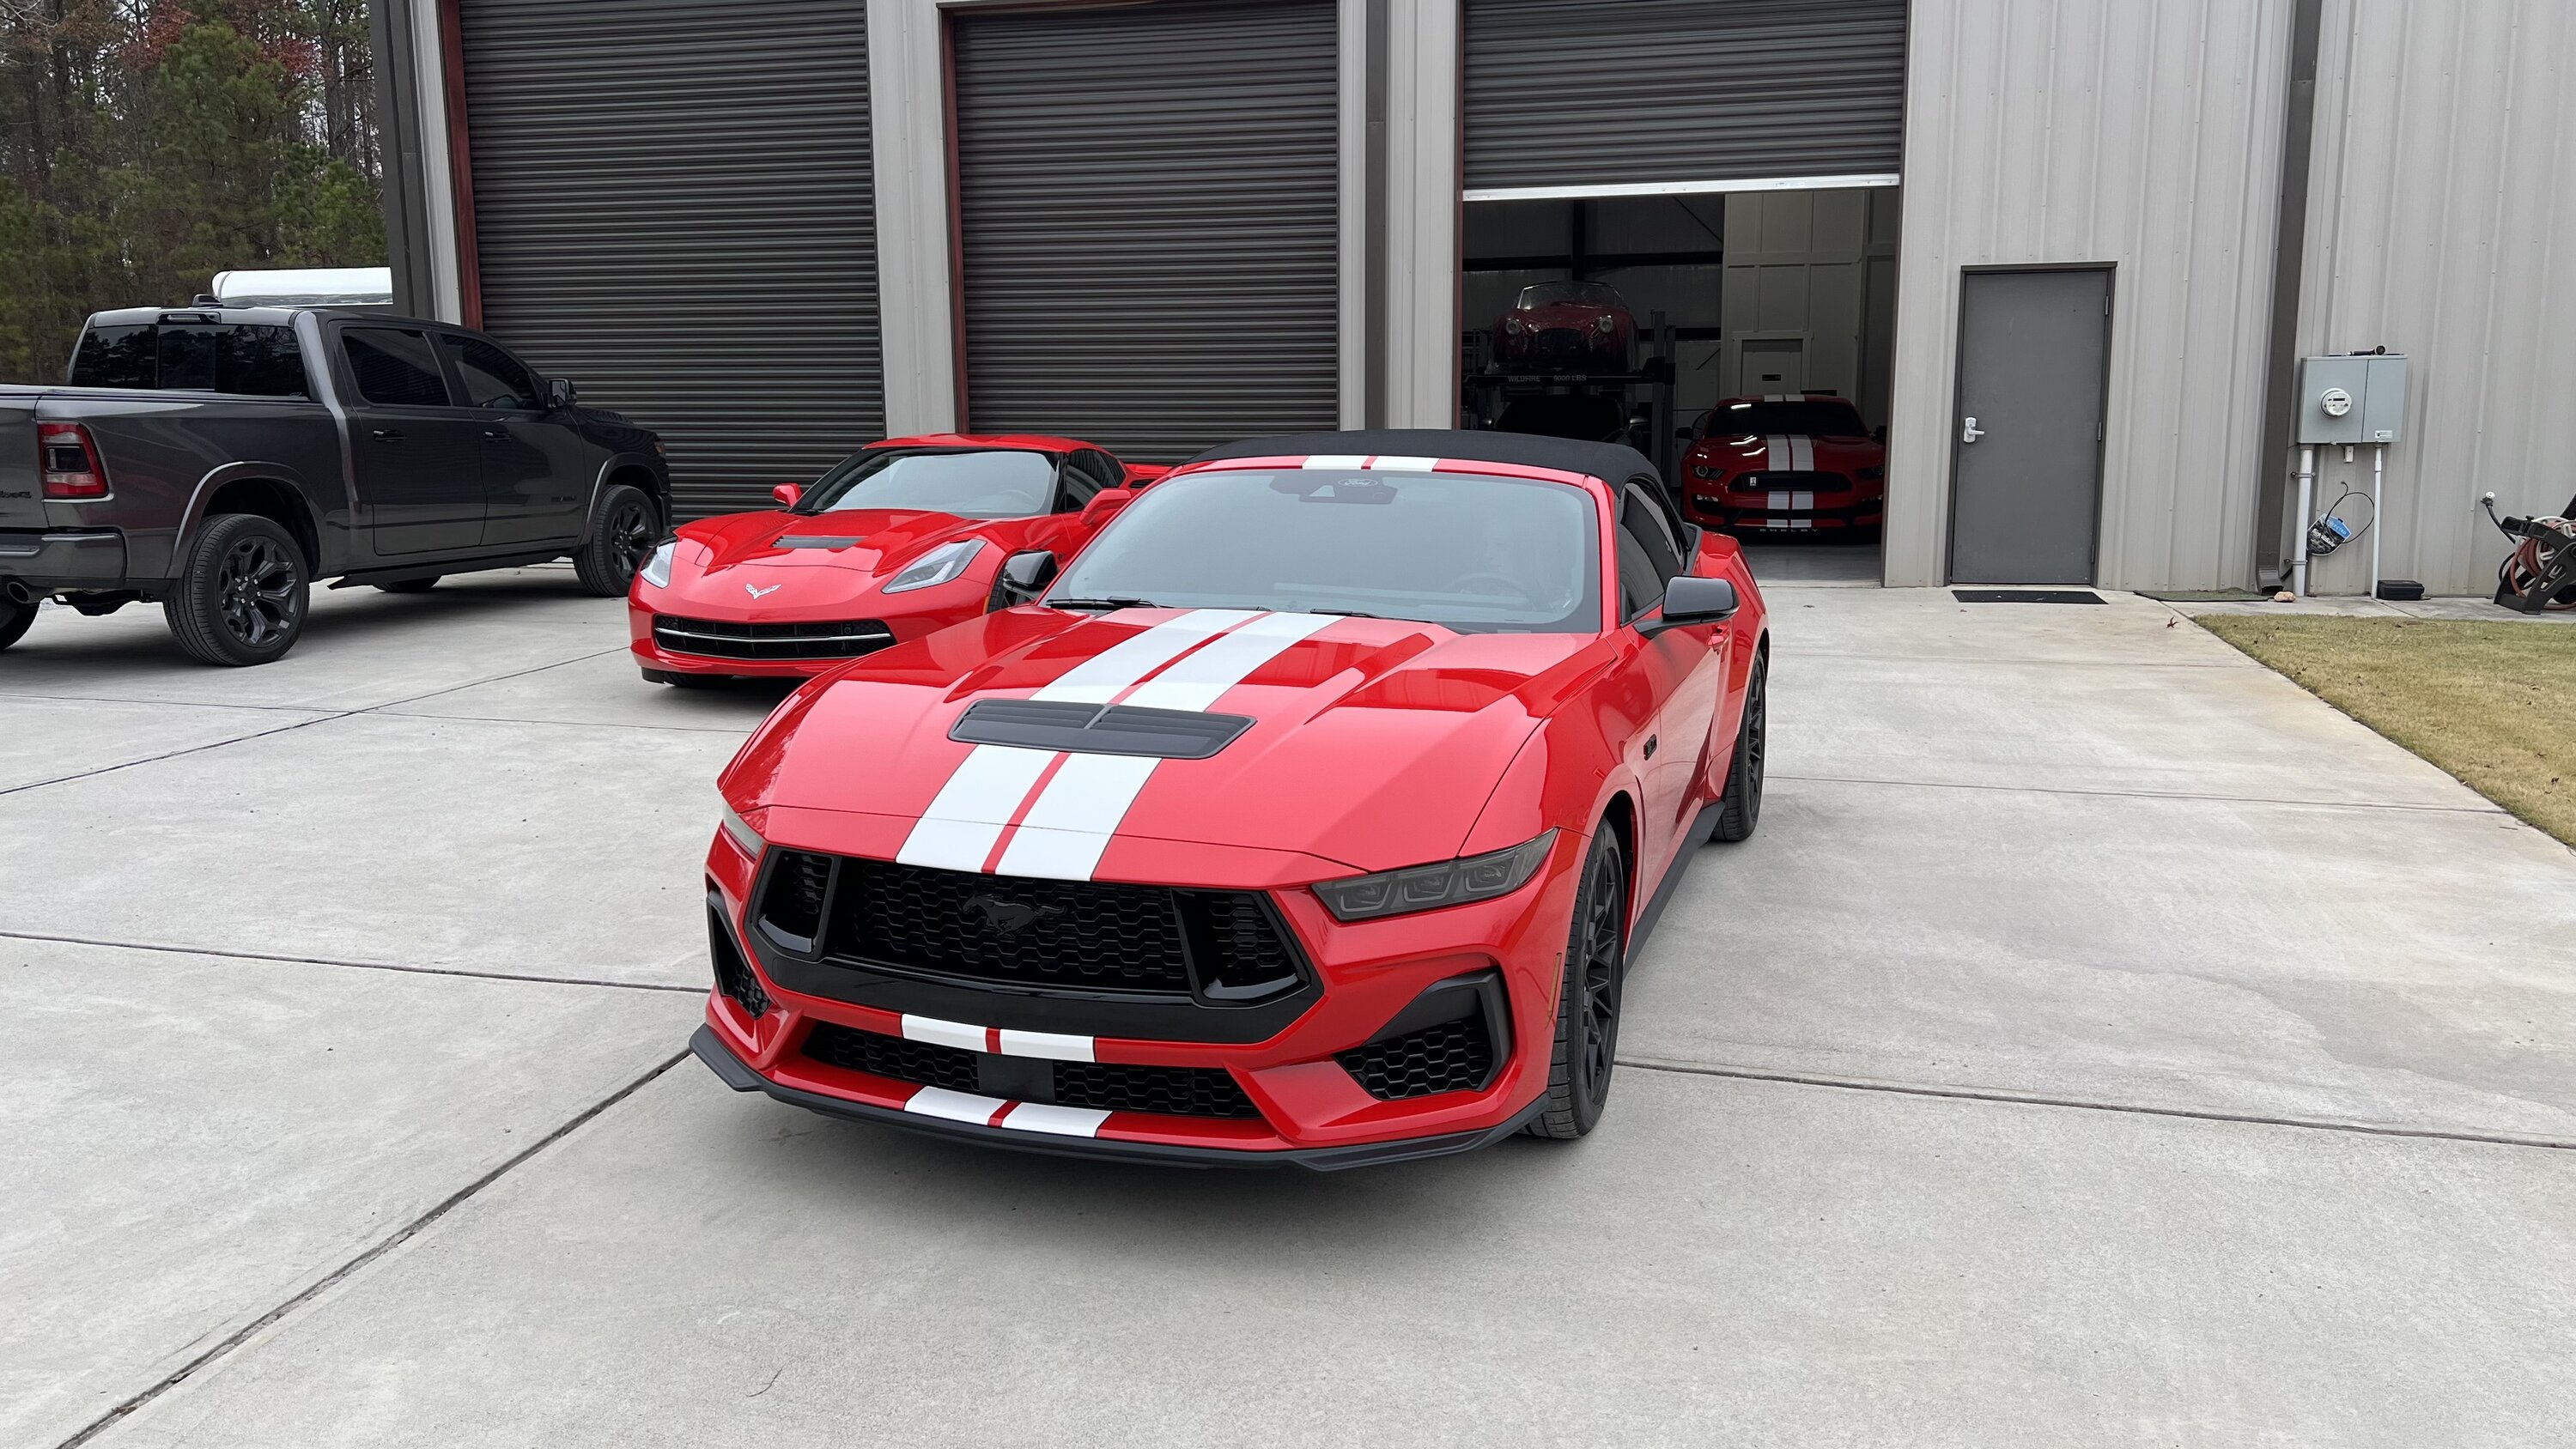 S650 Mustang S650 Red convertible with stripes next to GT350 IMG_9418